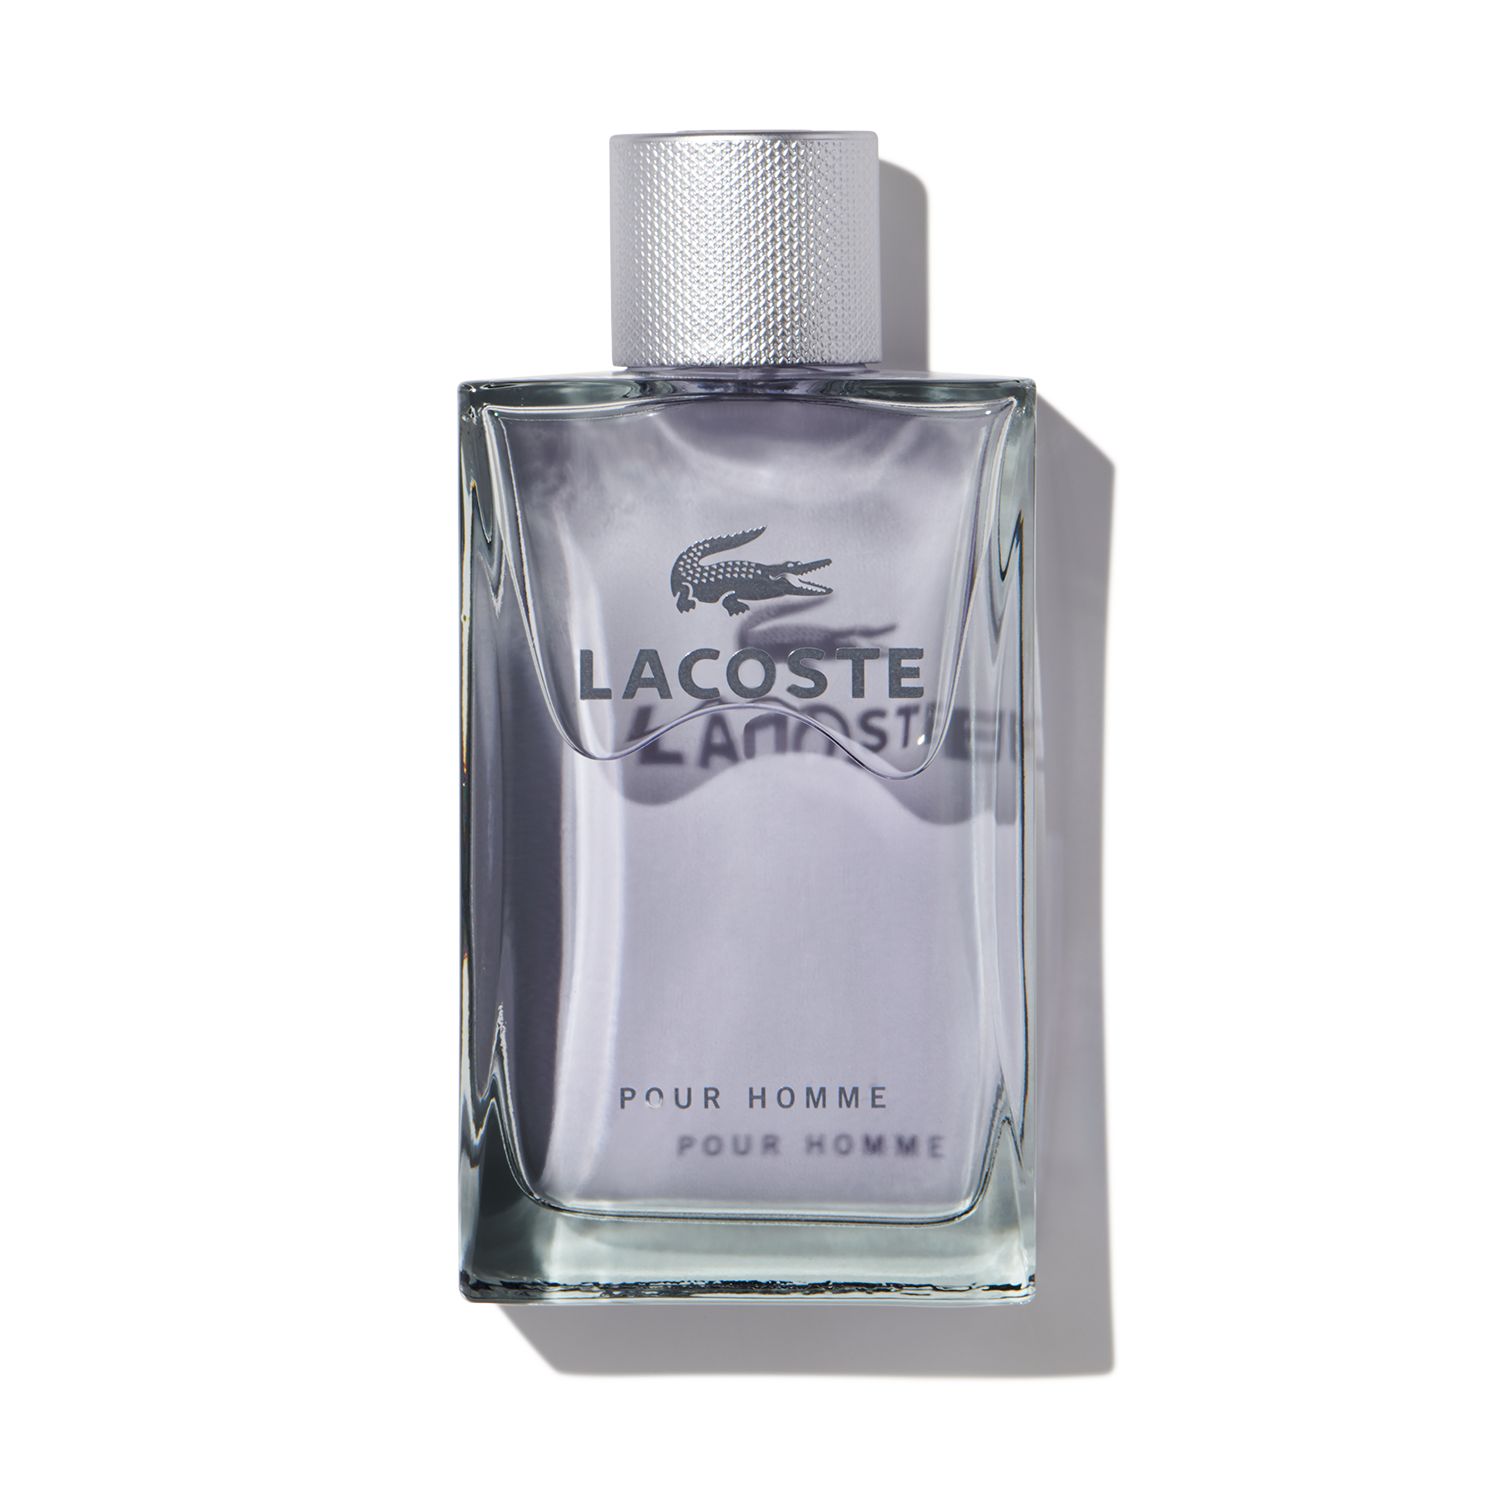 Pour Homme EDT by Lacoste $16.95/month | Scentbird